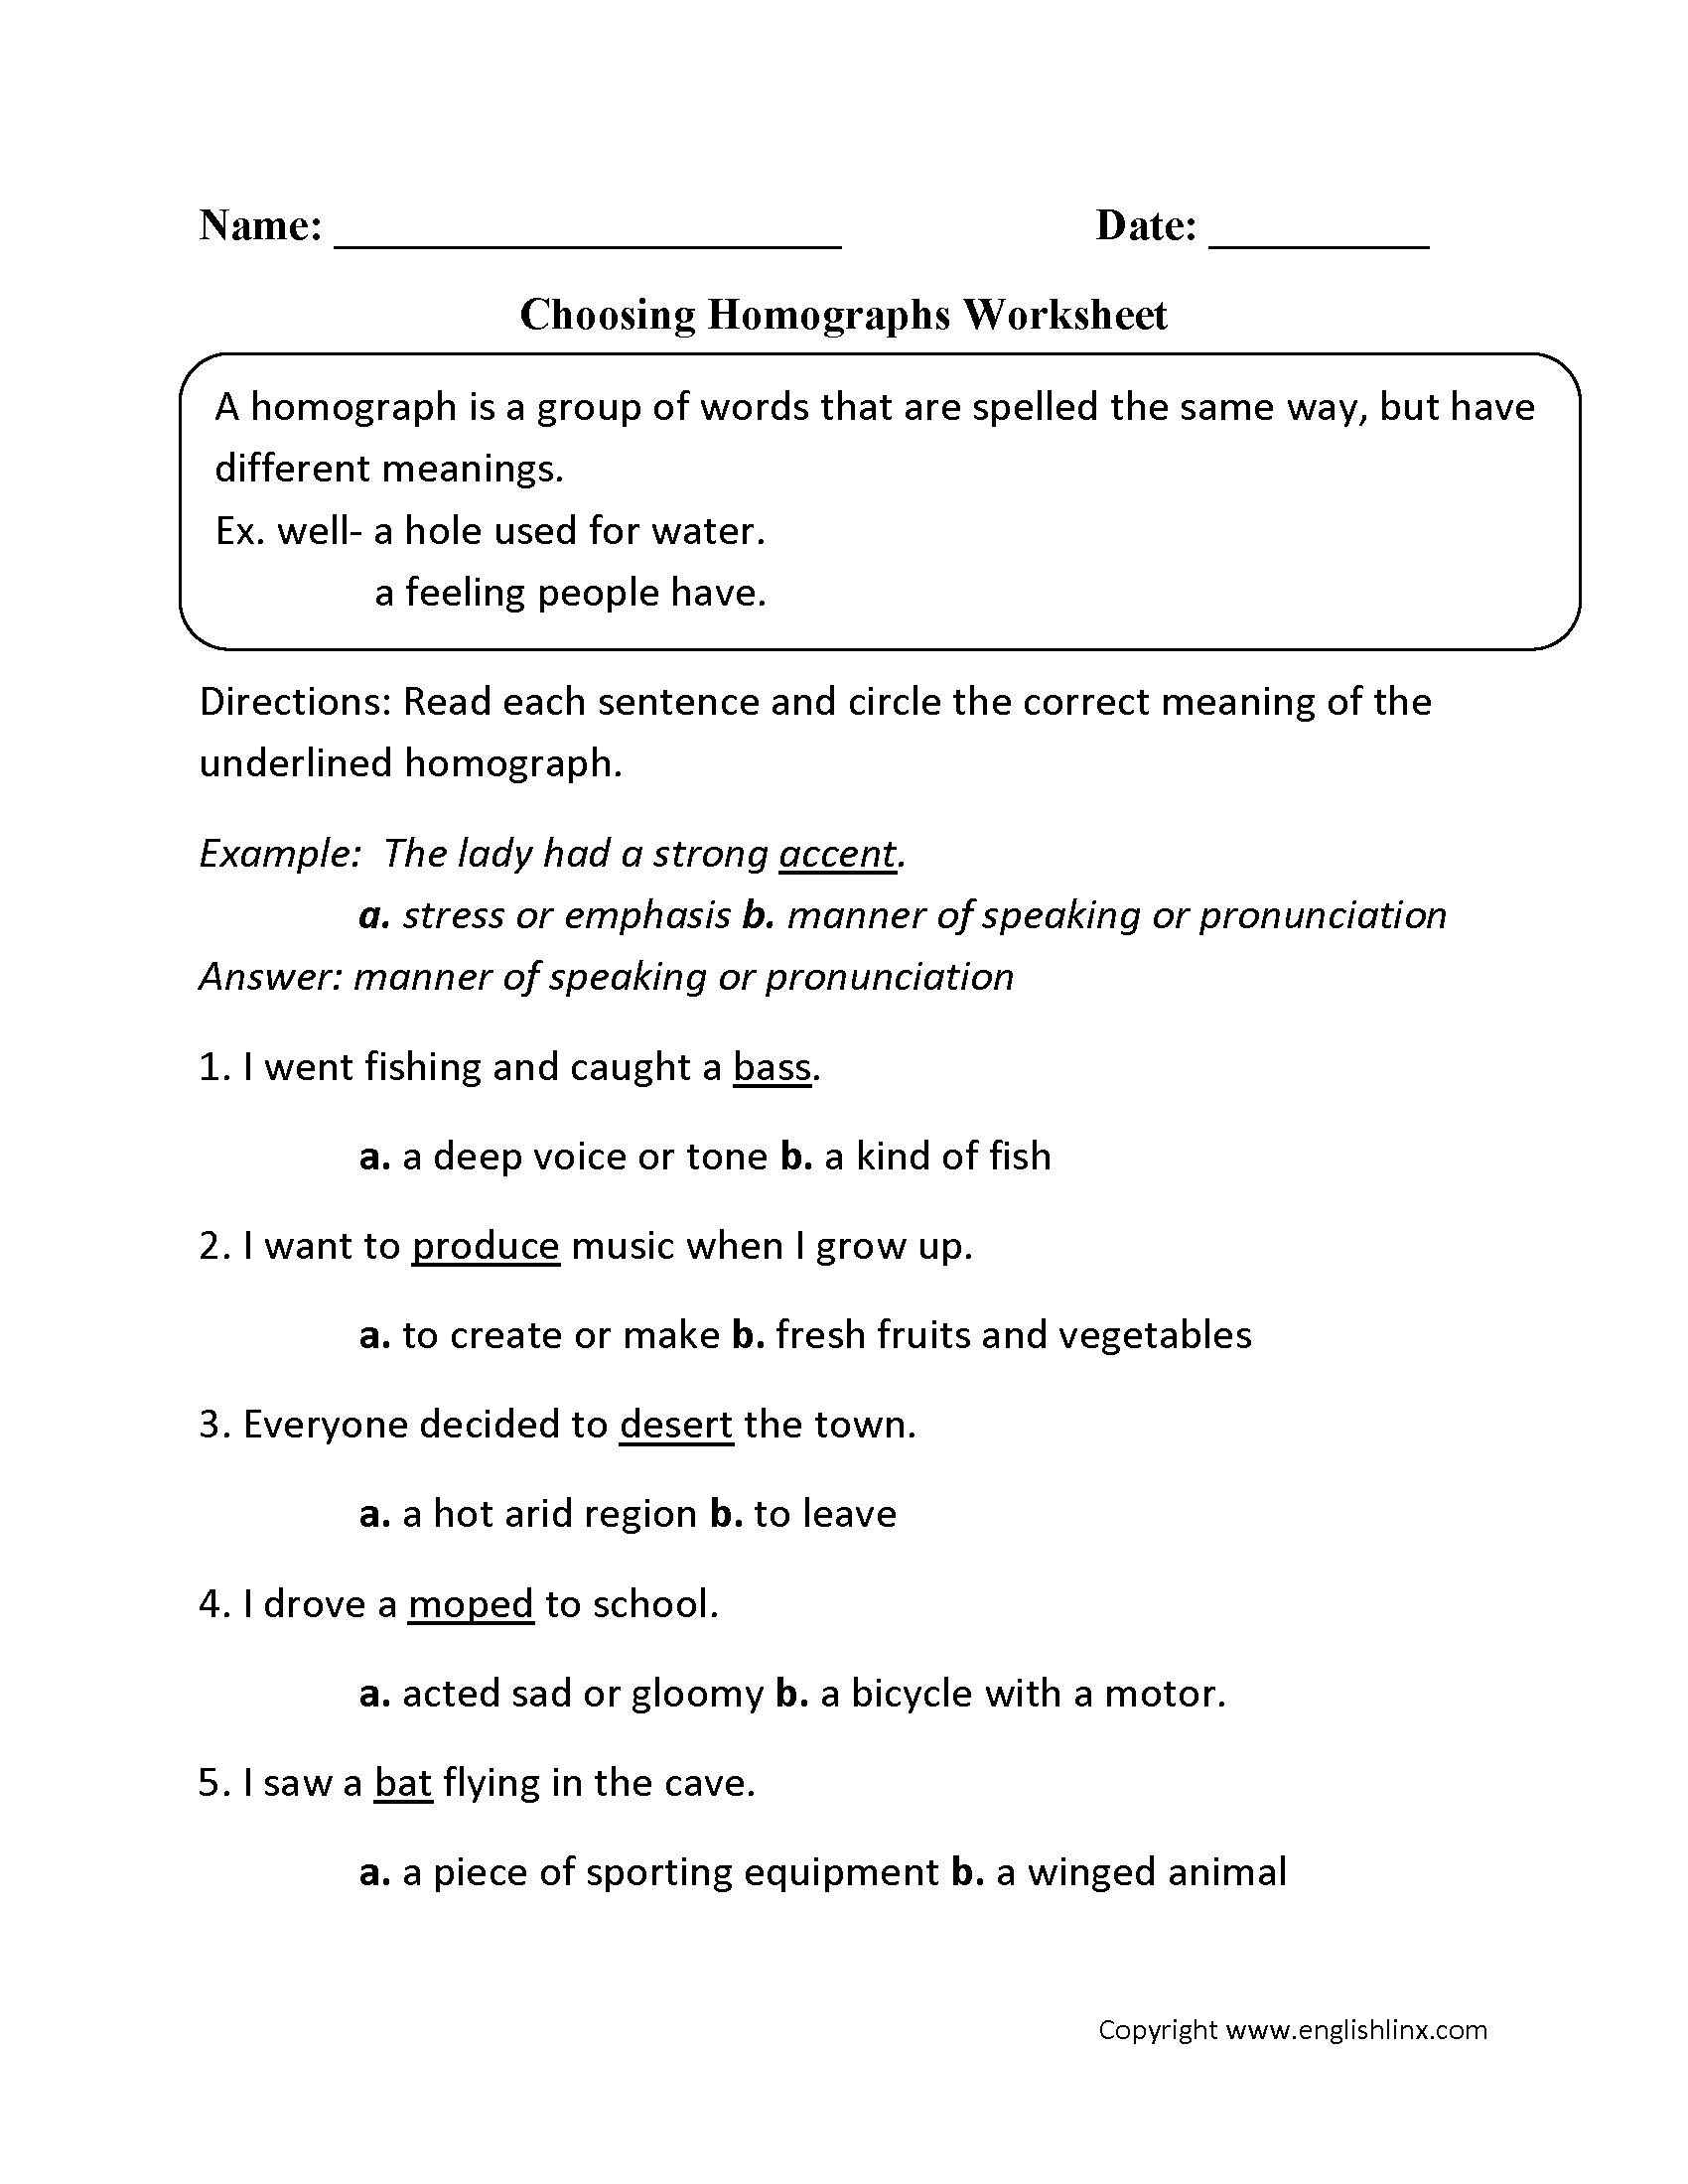 Homograph Worksheet 5th Grade Multiple Meaning Words Worksheets 5th Grade In 2020 with